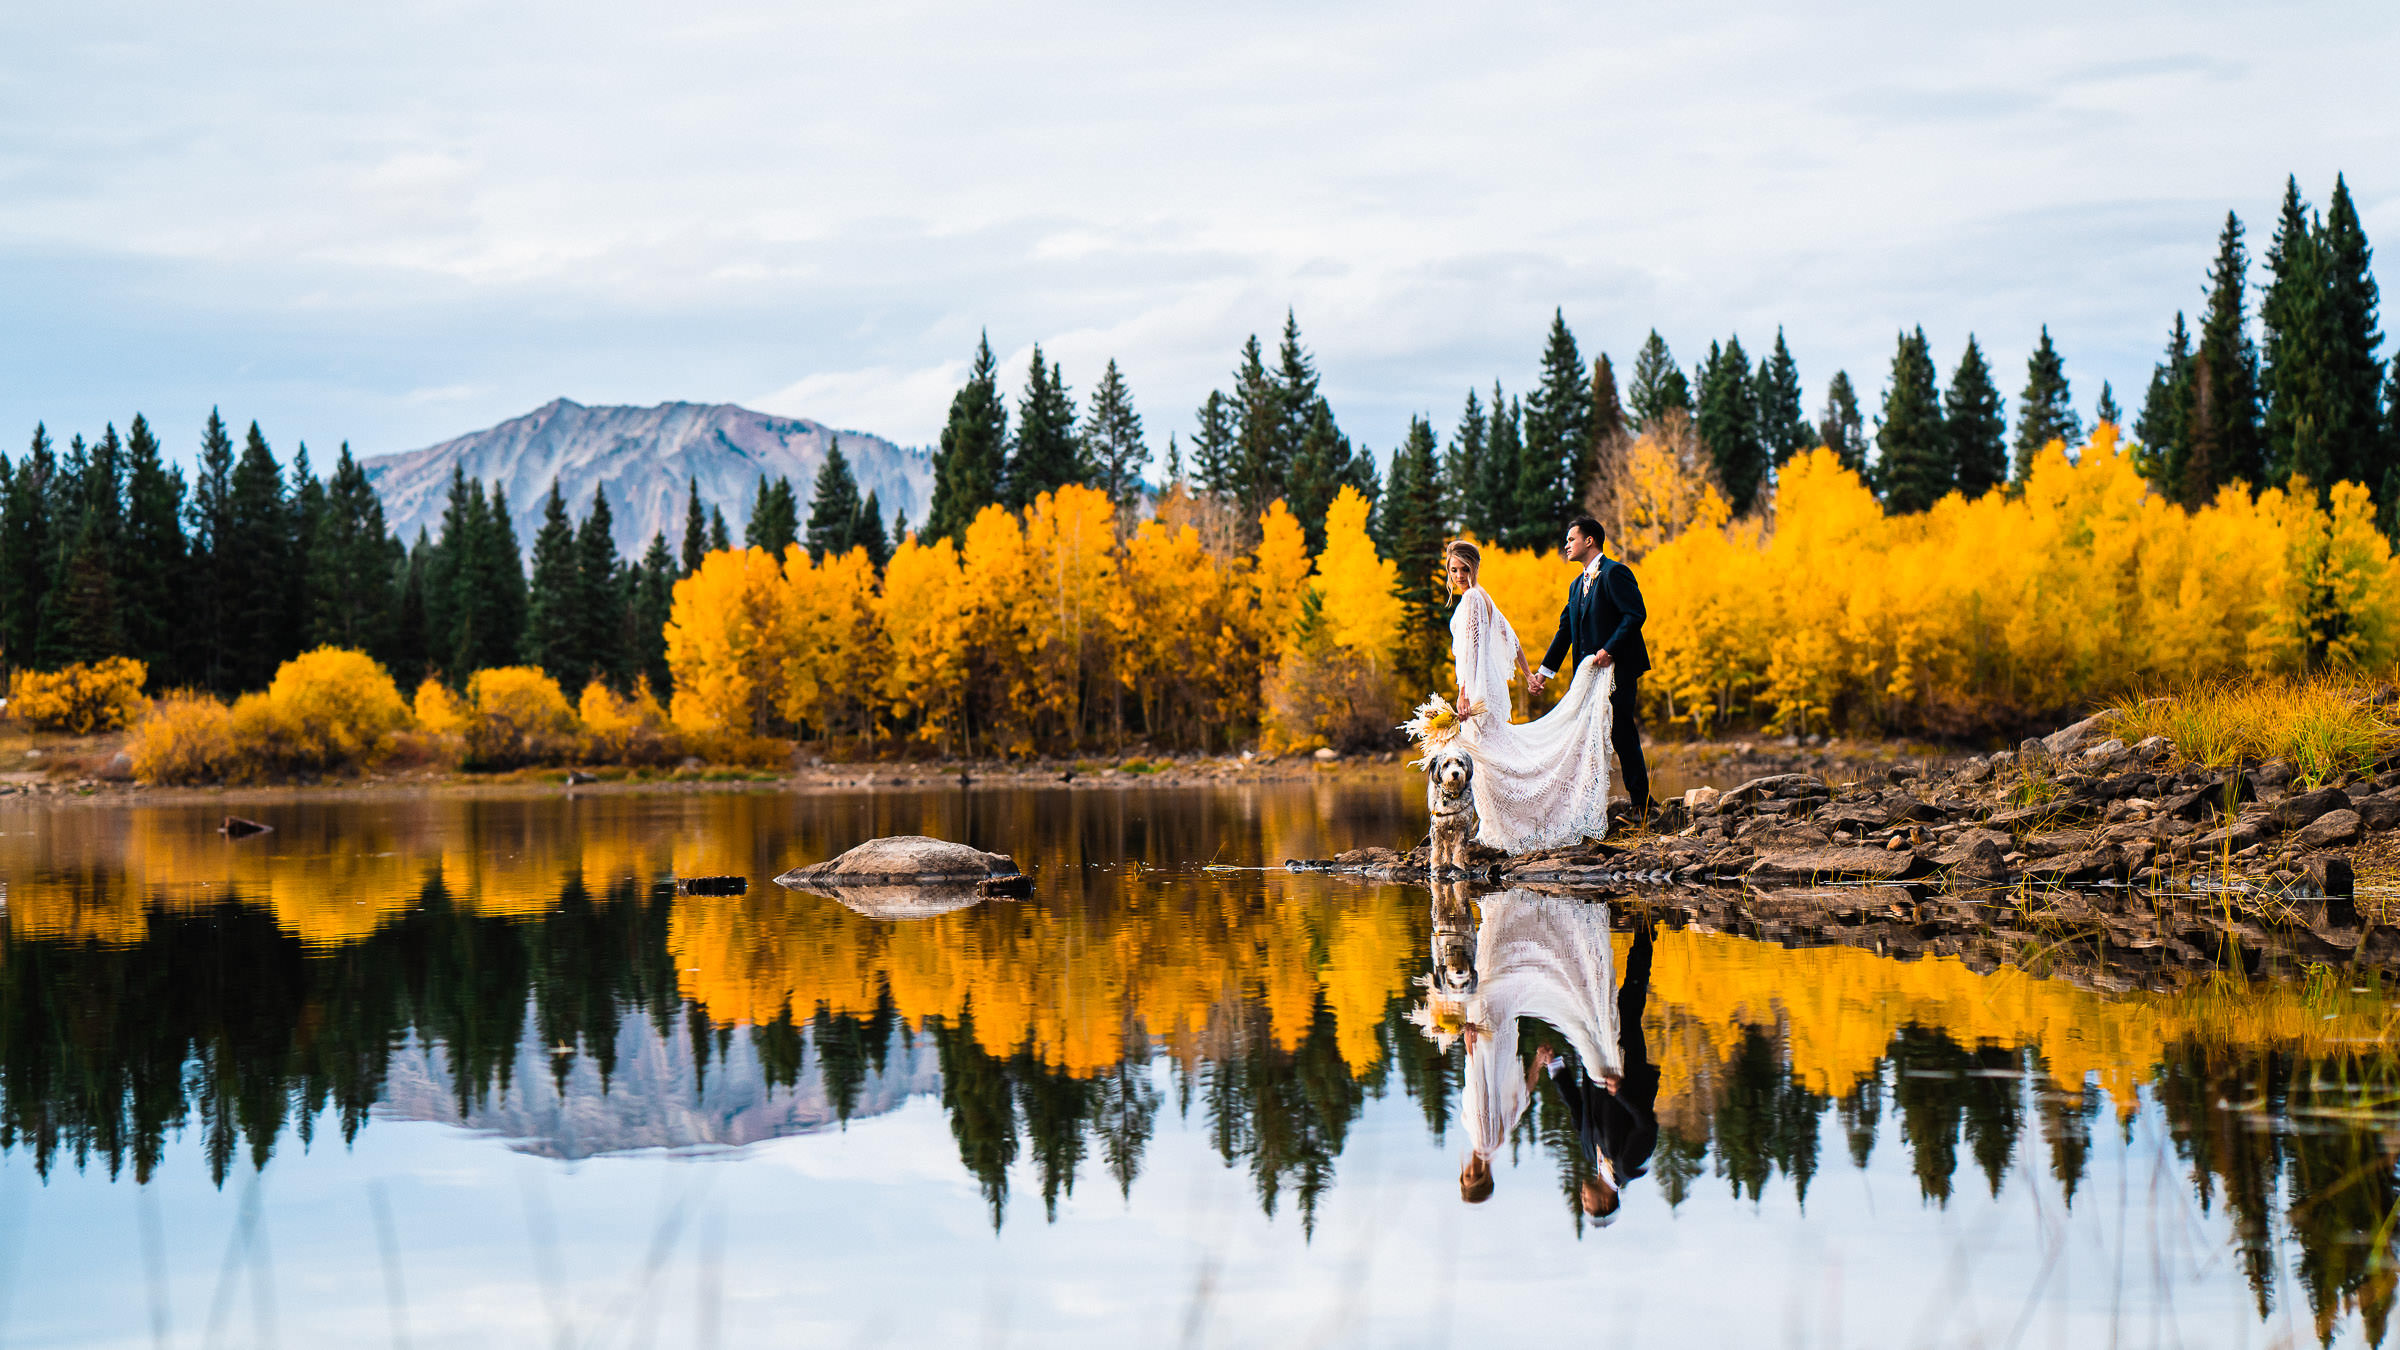 Adventurous Crested Butte Elopement in the mountains